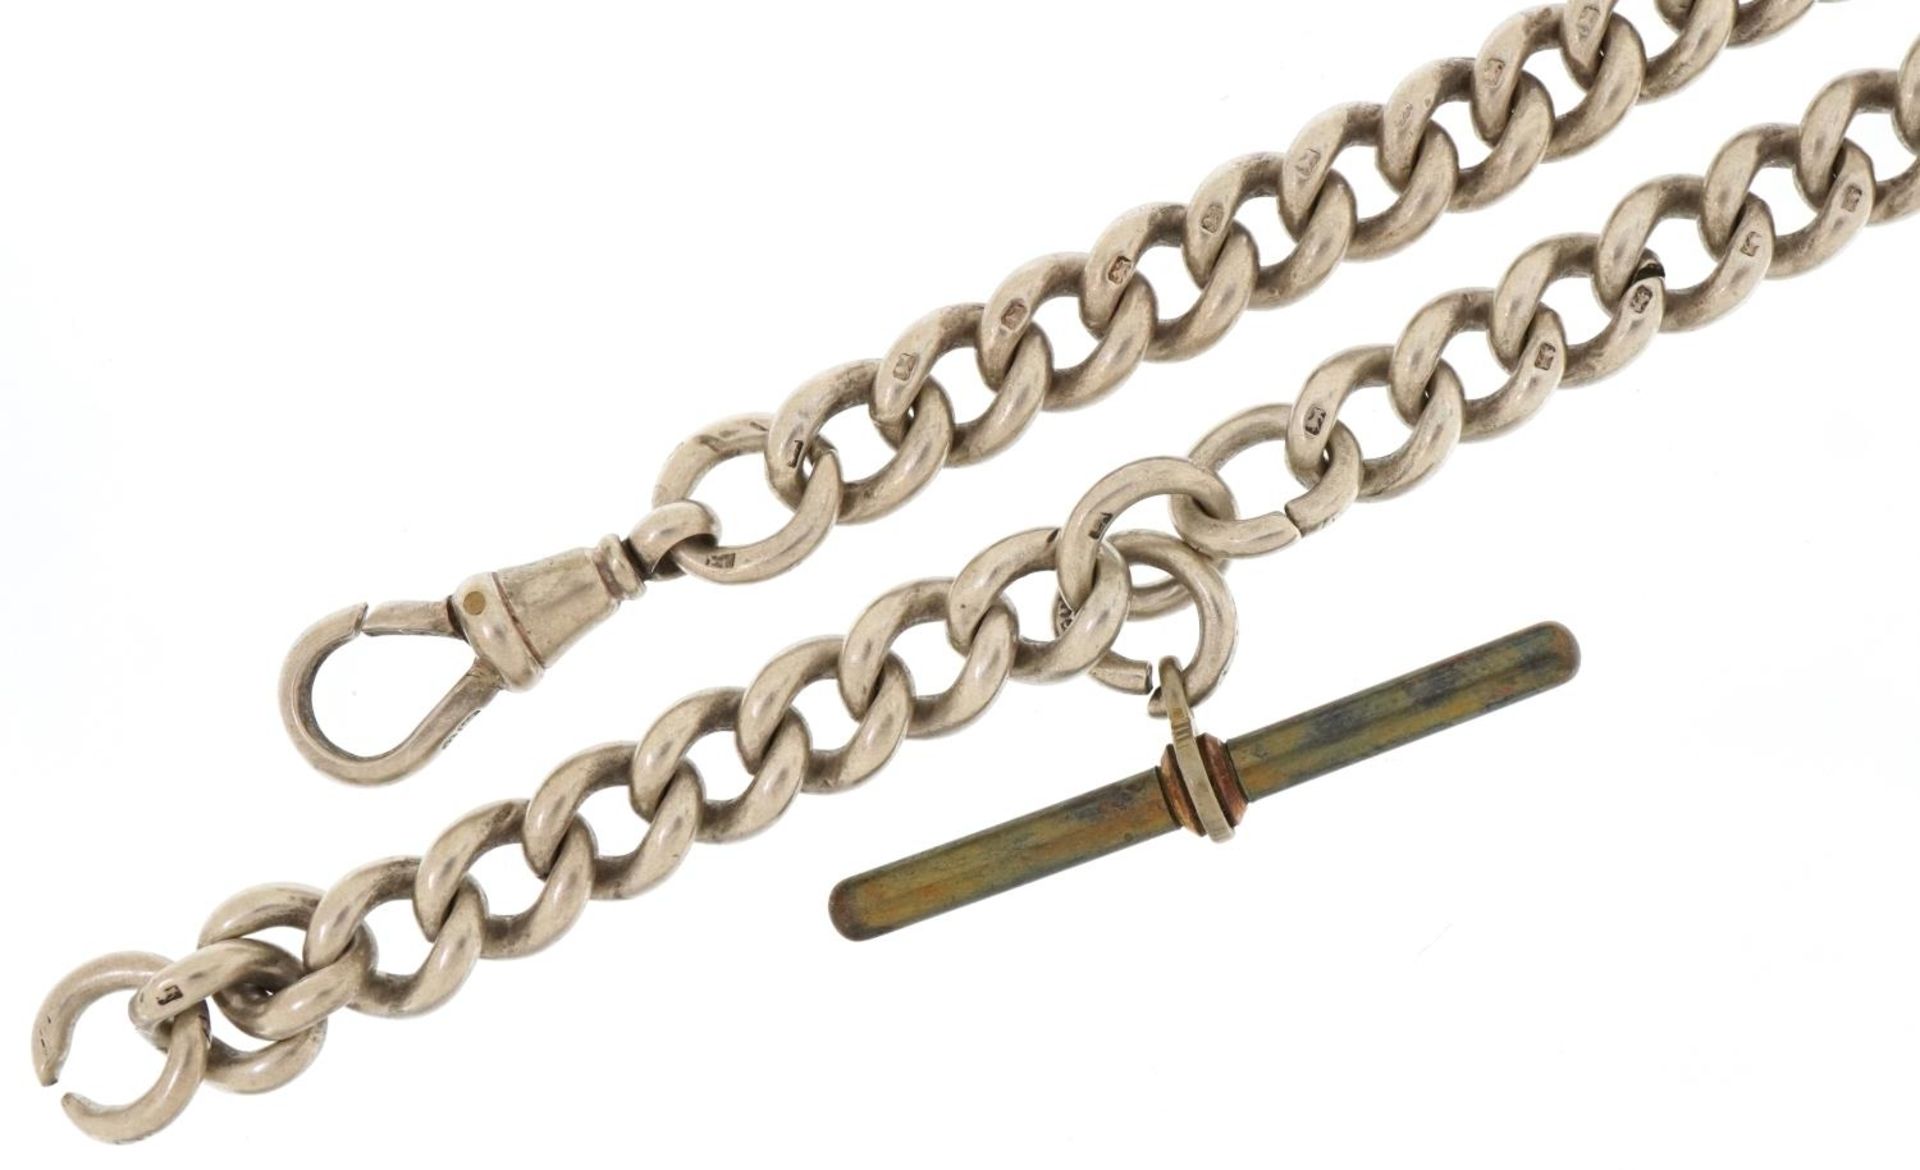 Silver watch chain with swivel dog clip clasp and white metal T bar, 36cm in length, 54.0g